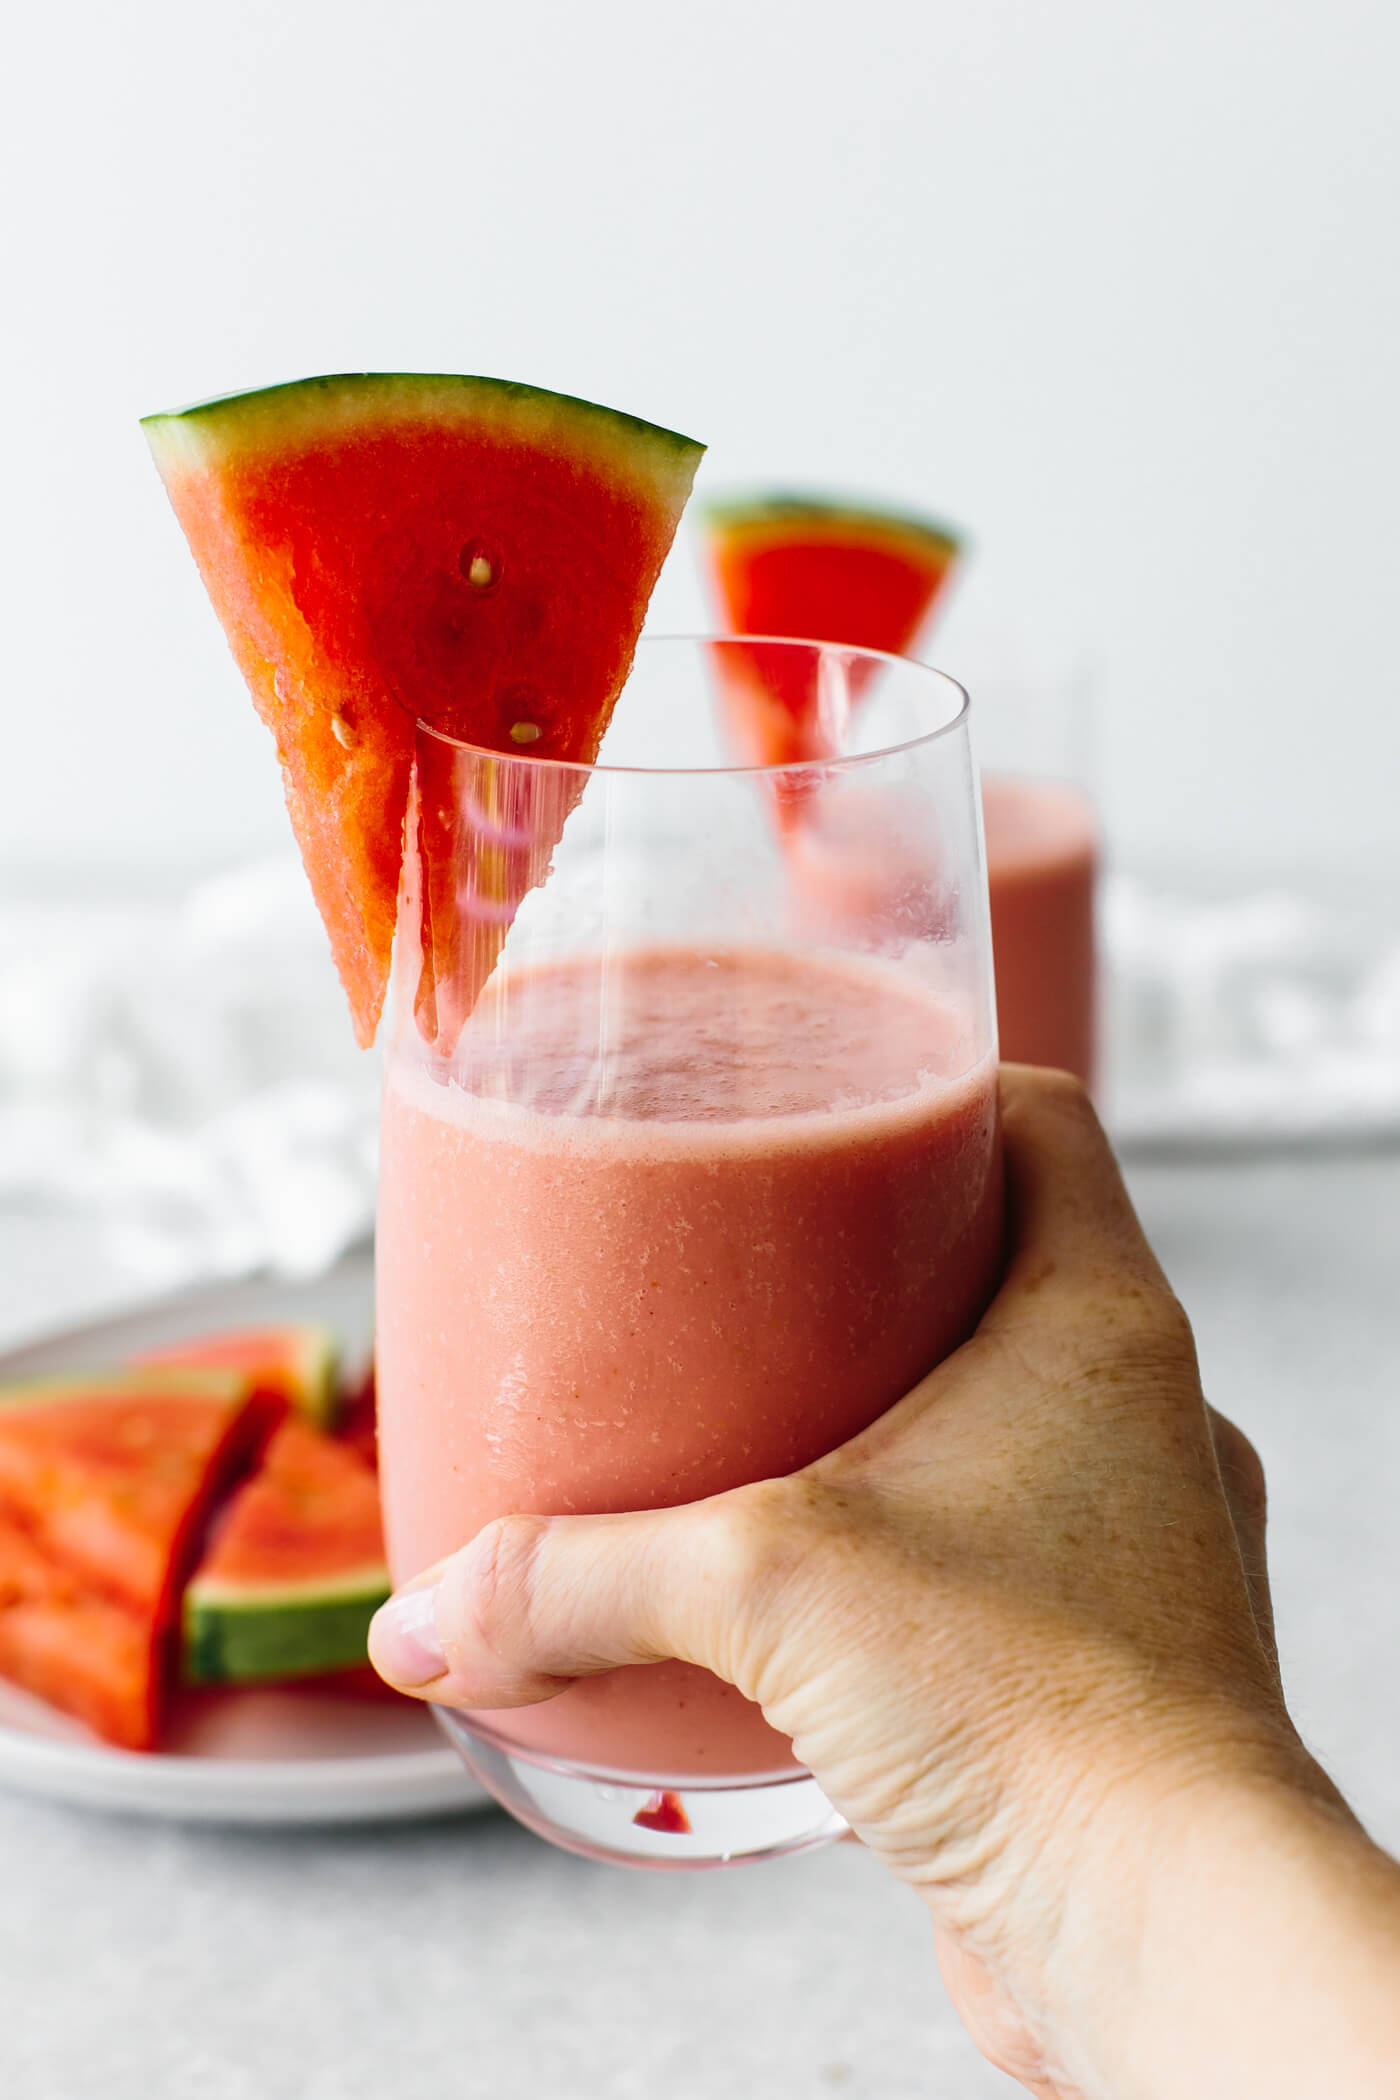 Holding a glass of watermelon smoothie